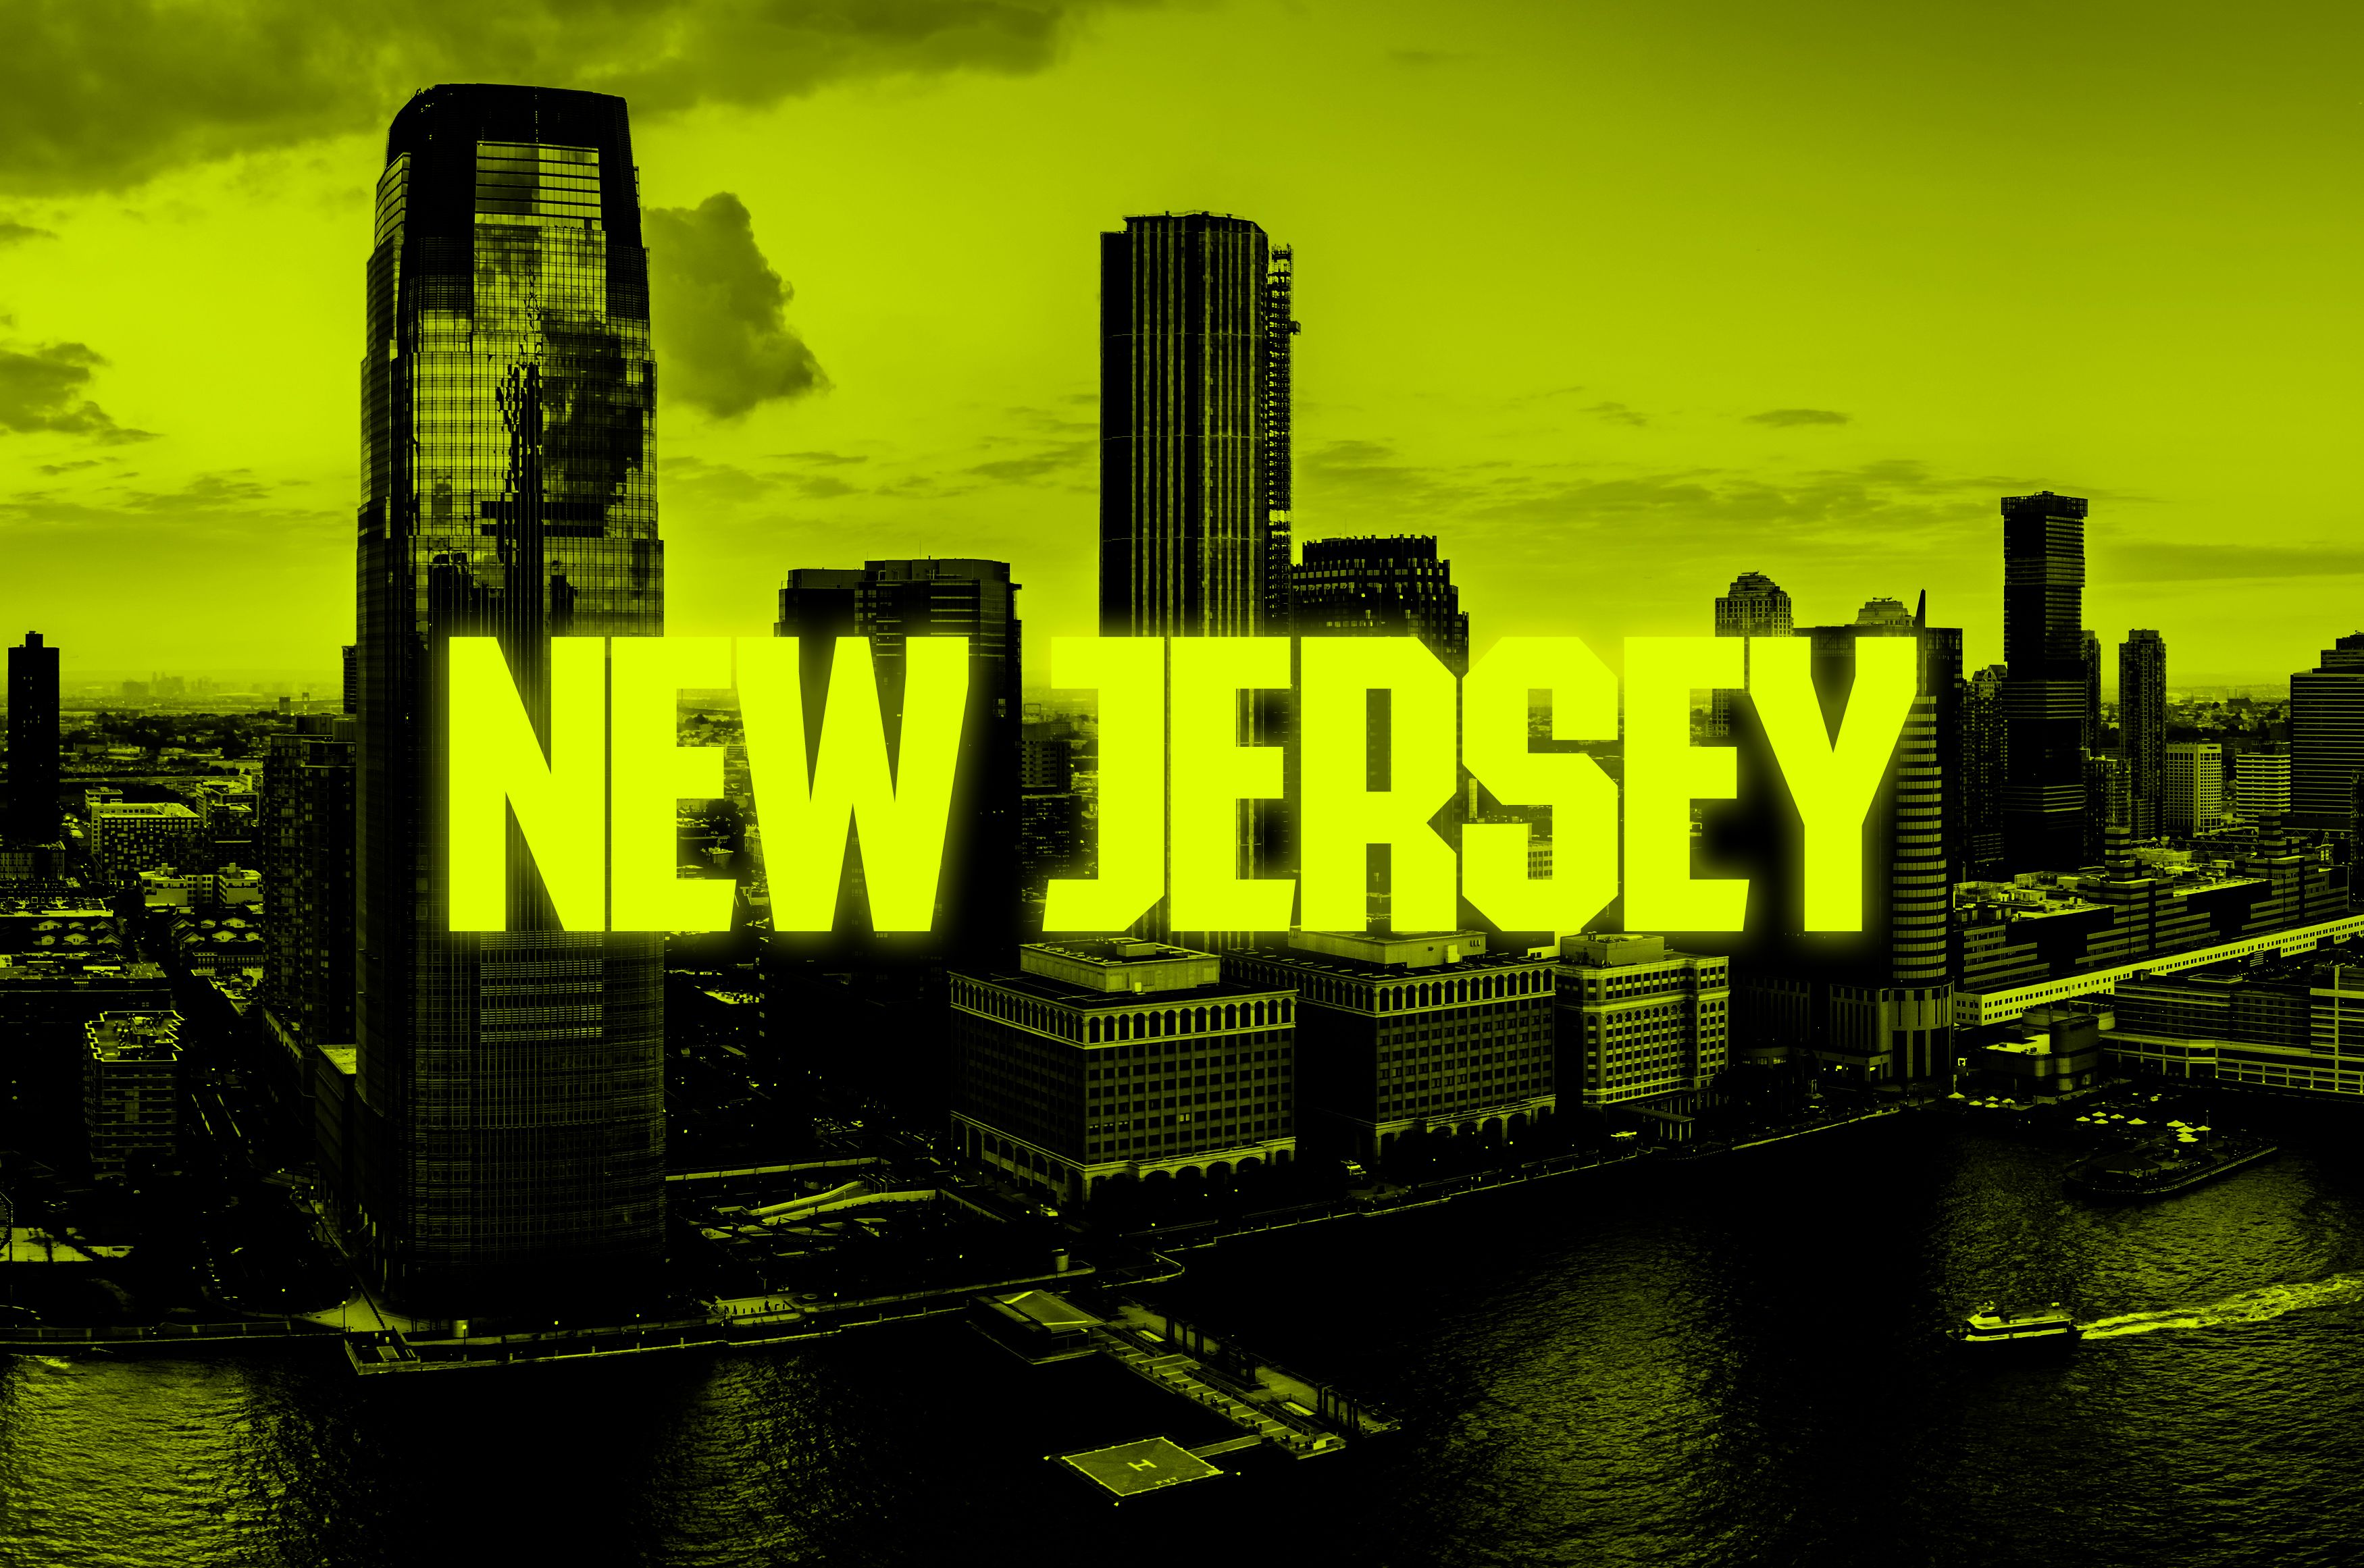 An image of the New Jersey skyline